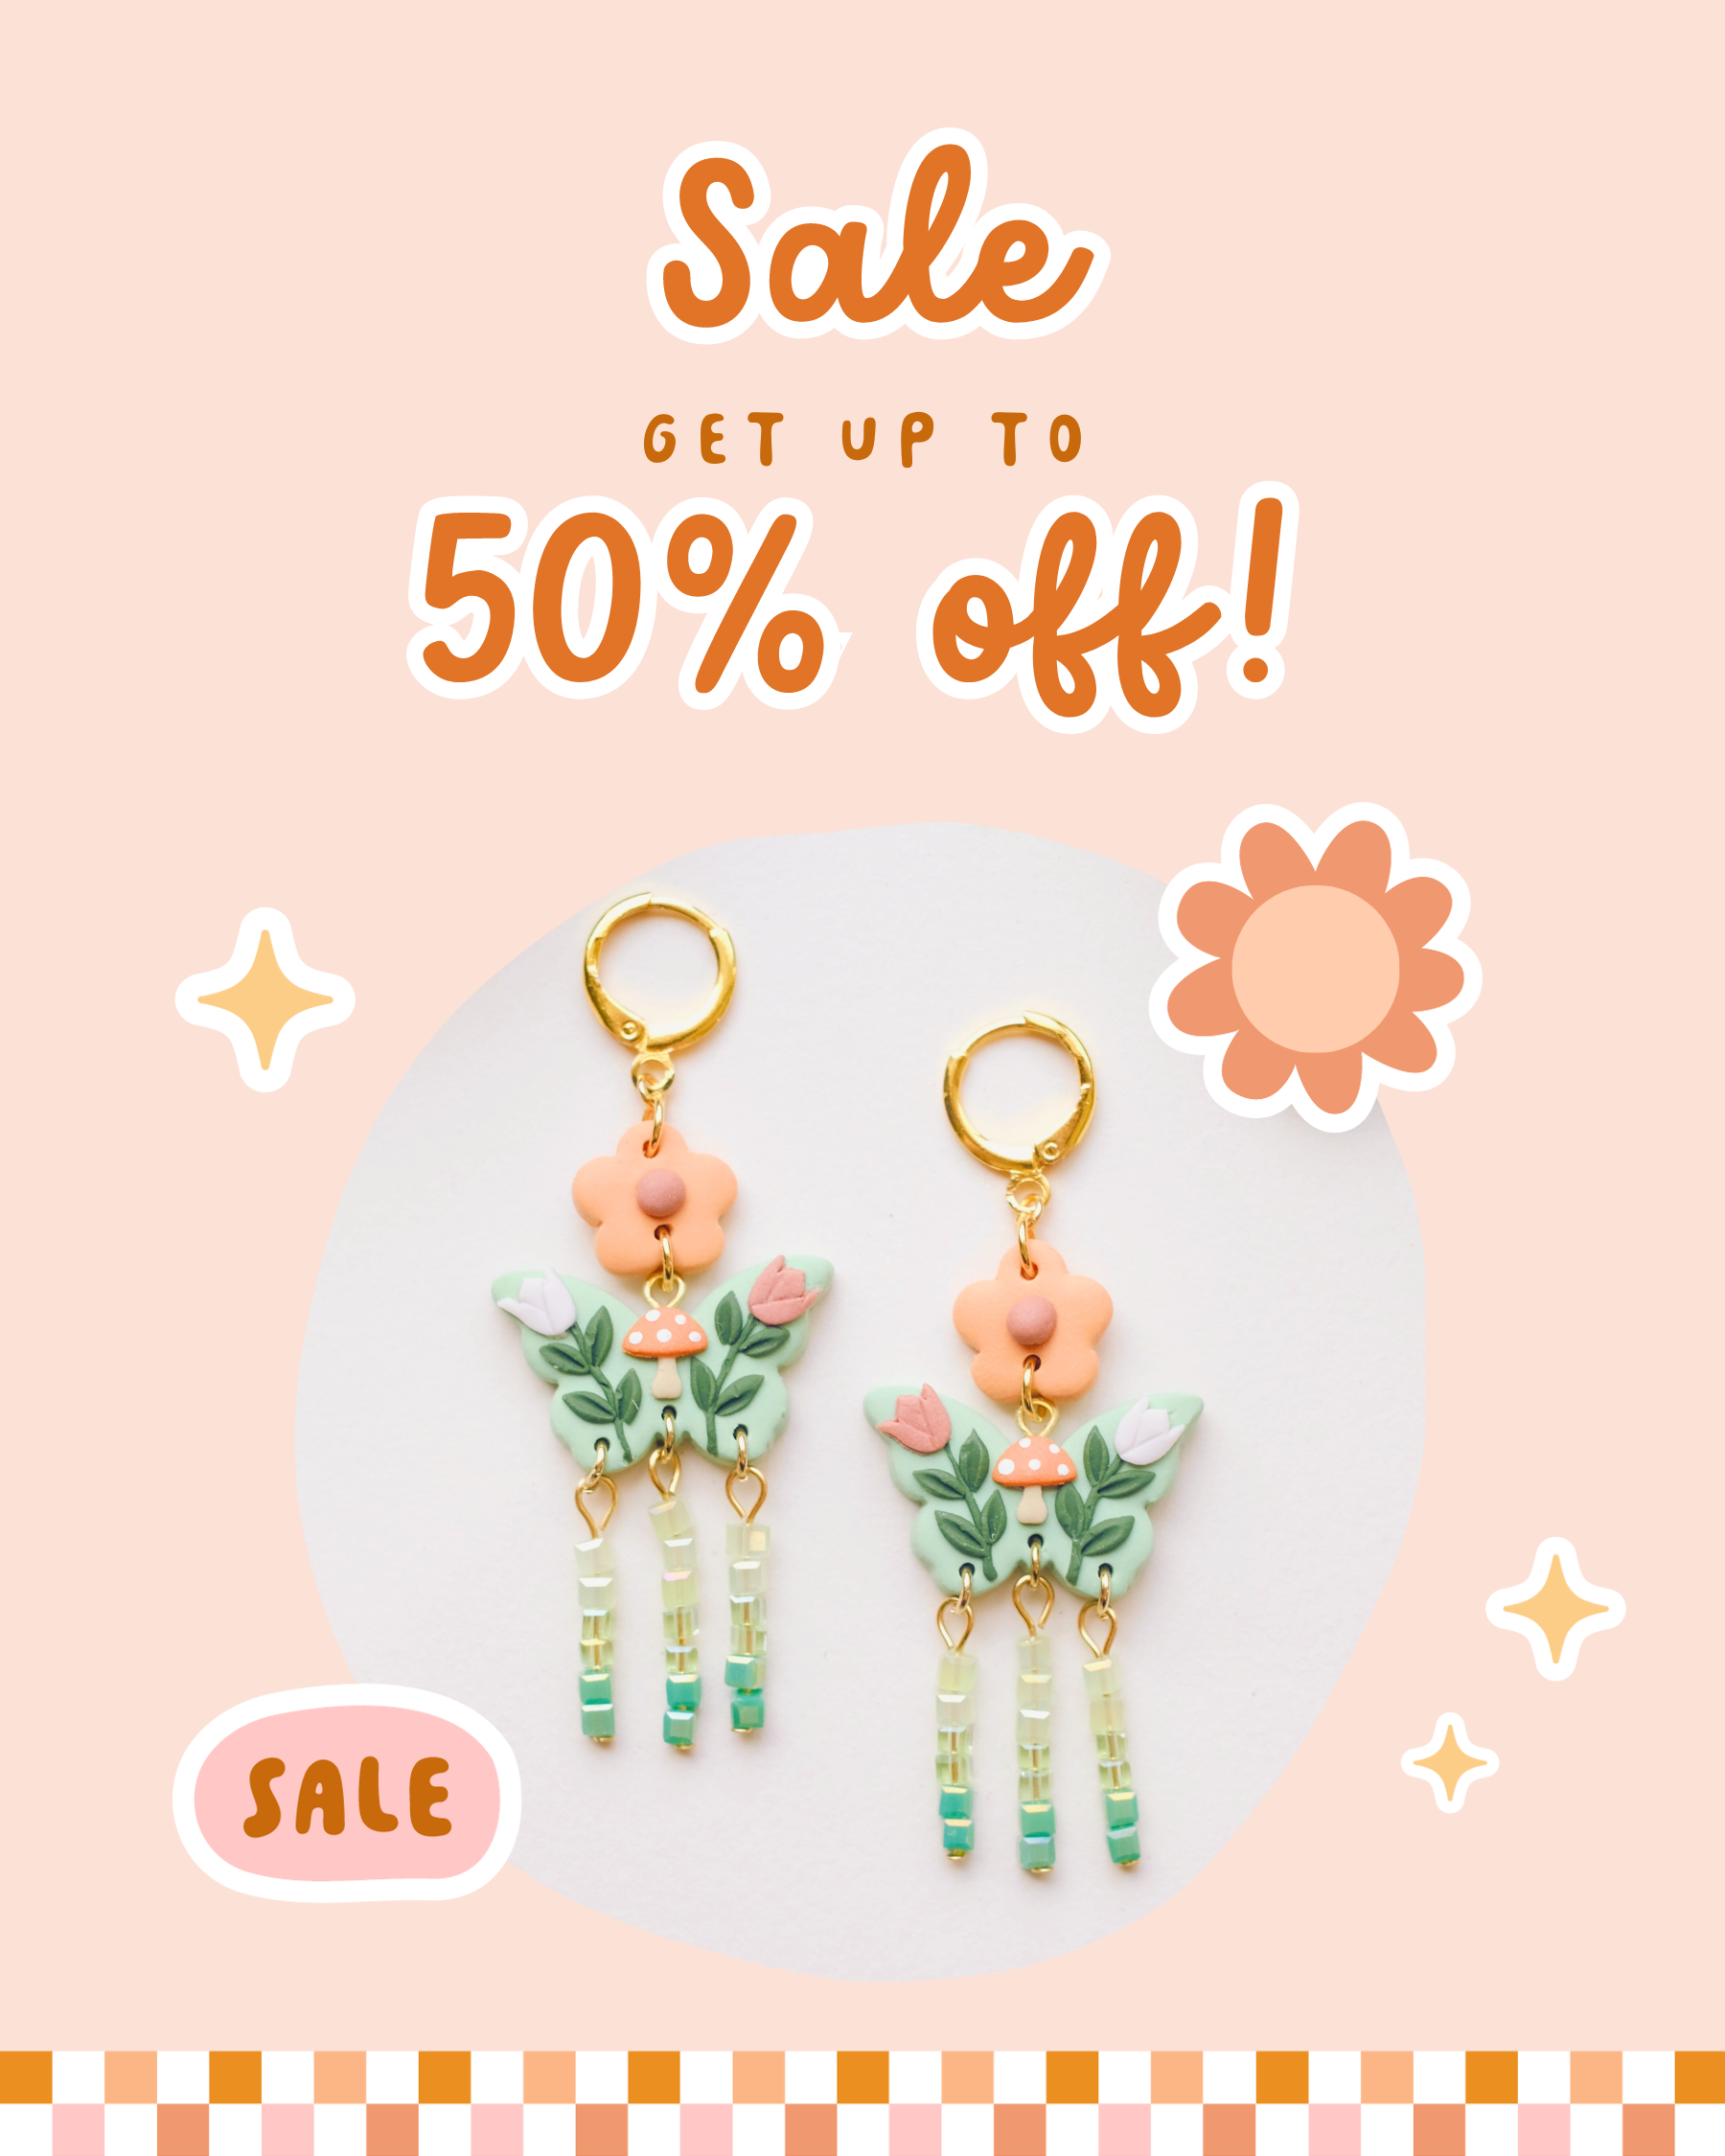 Get up to 50% off the sale items from my website, including earrings, accessories, stickers, and home goods!